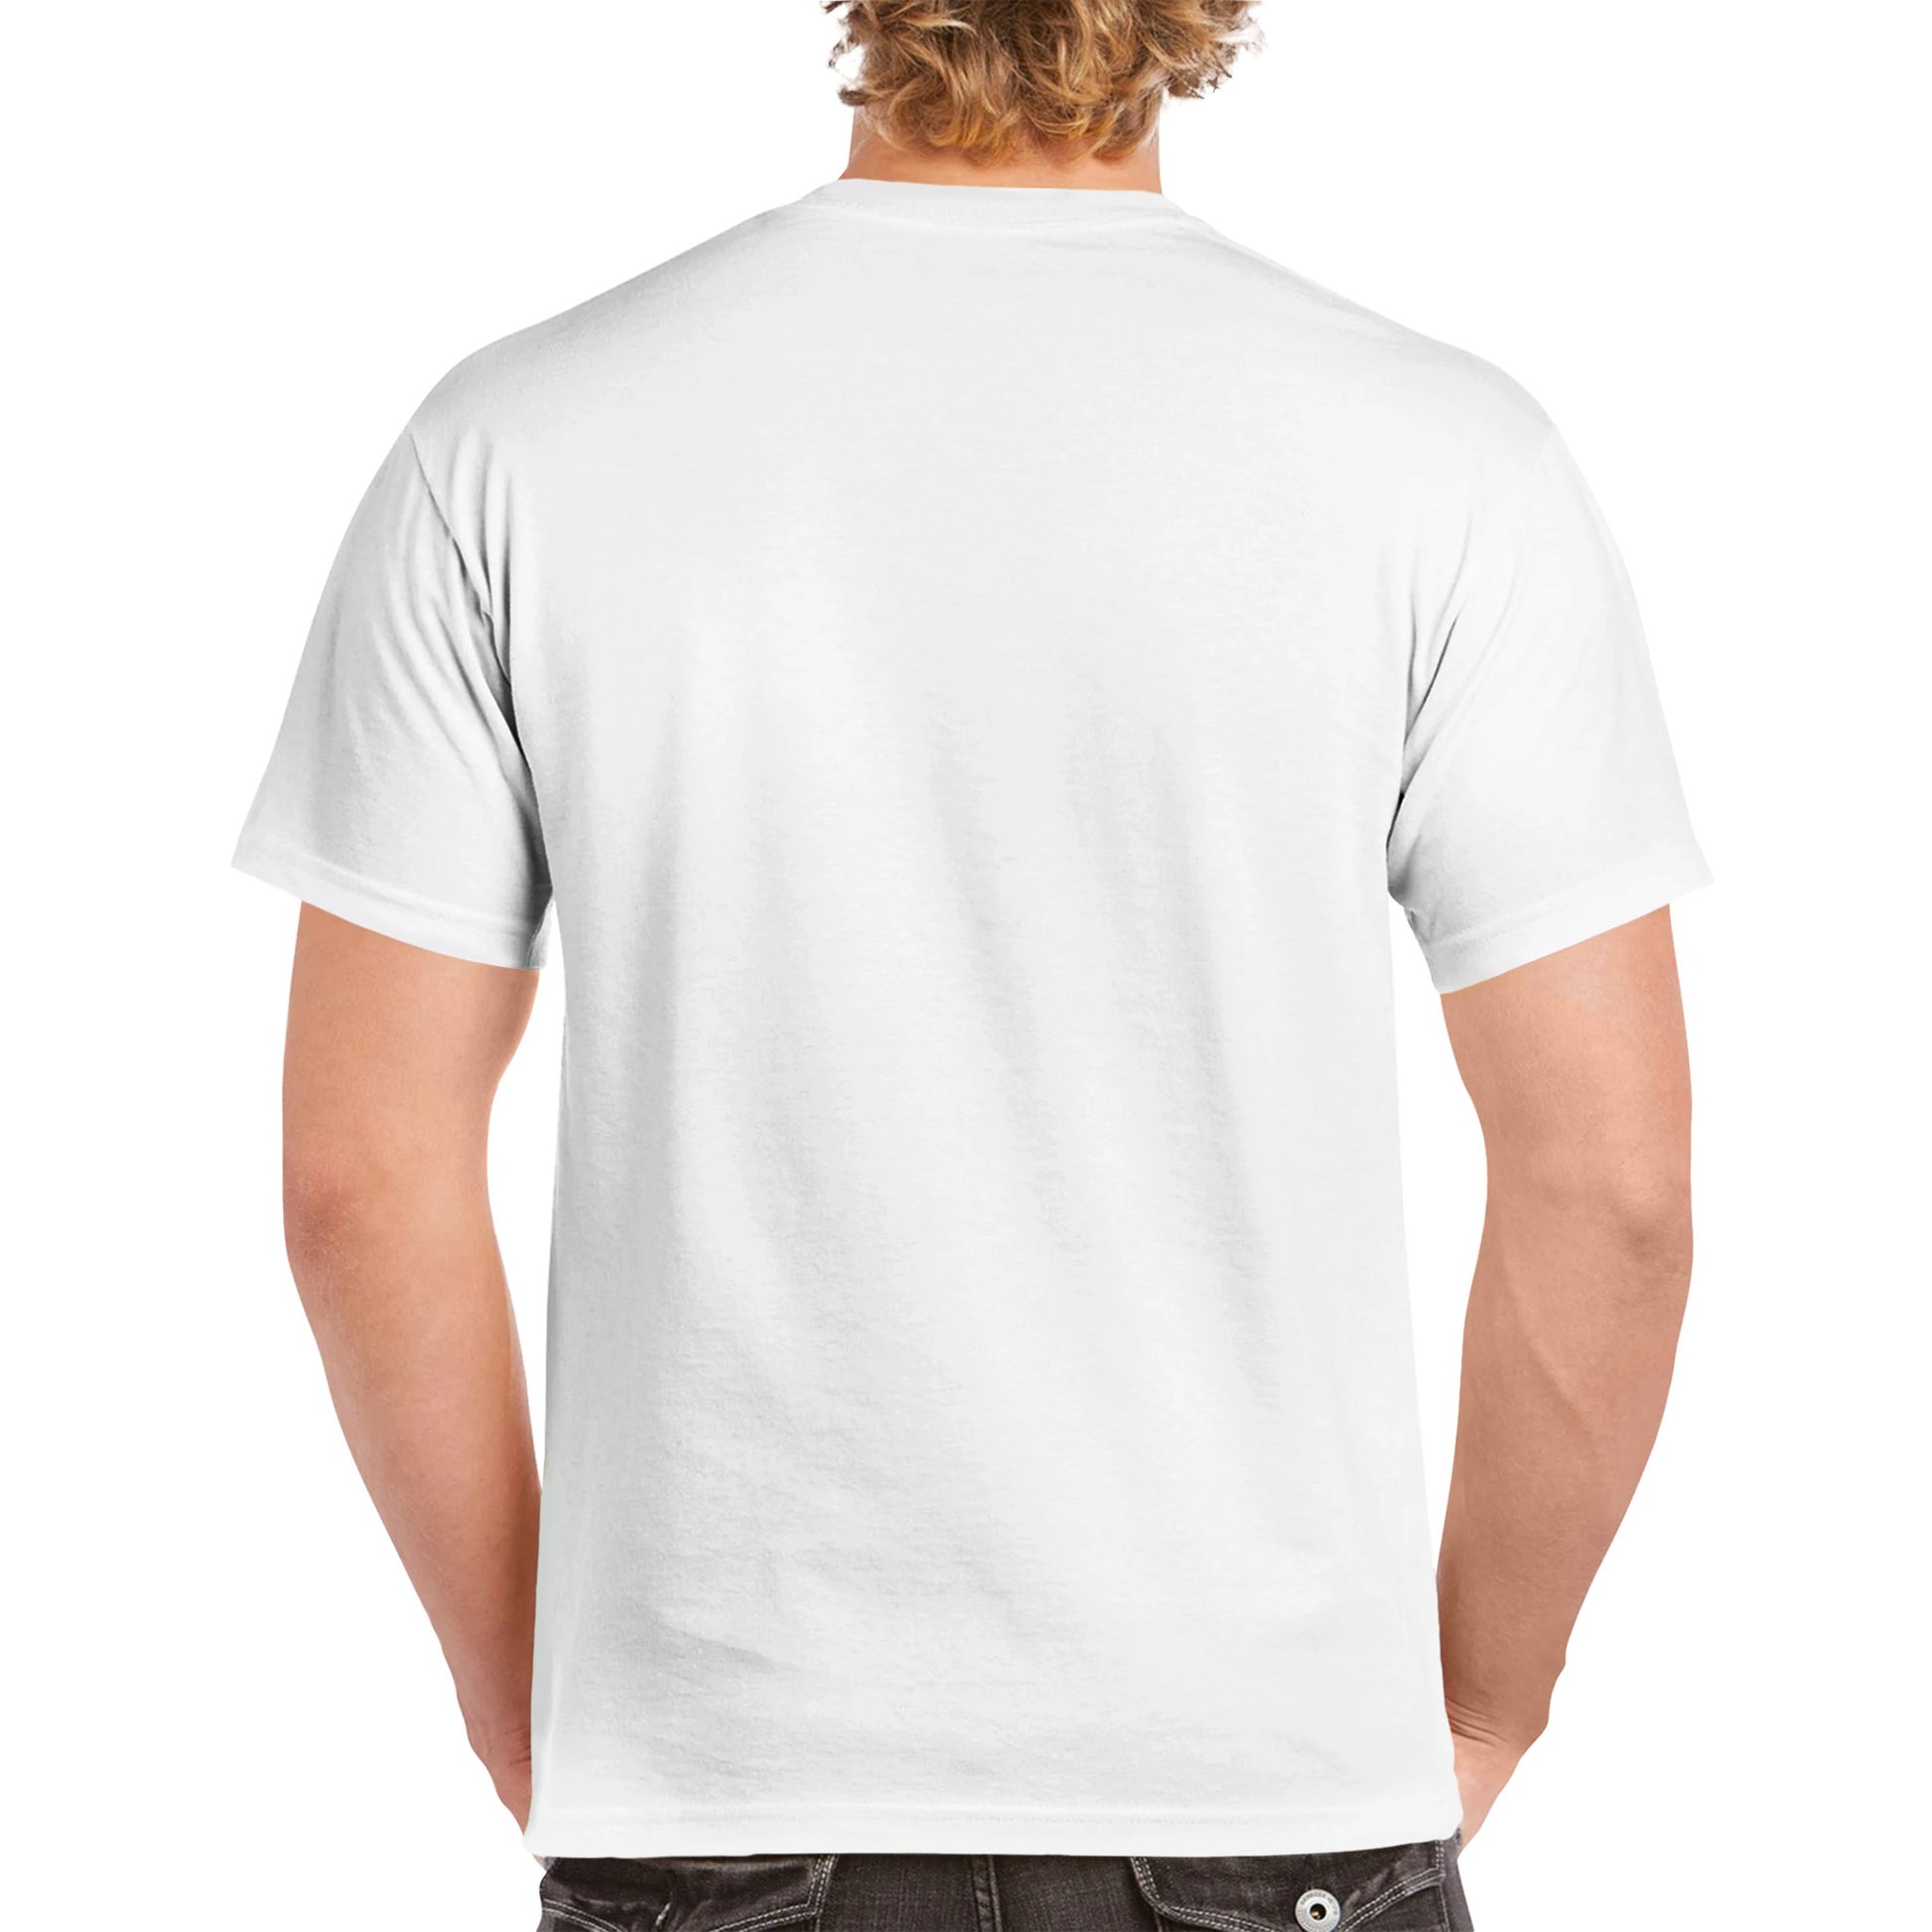 A white comfortable Unisex Crewneck heavyweight cotton t-shirt with funny saying It’s PickleBall Baby if can’t stand the heat – Stay out of the Kitchen!  and Let’s Play Pickleball logo on the front from WhatYa Say Apparel worn by blonde-haired male back view.